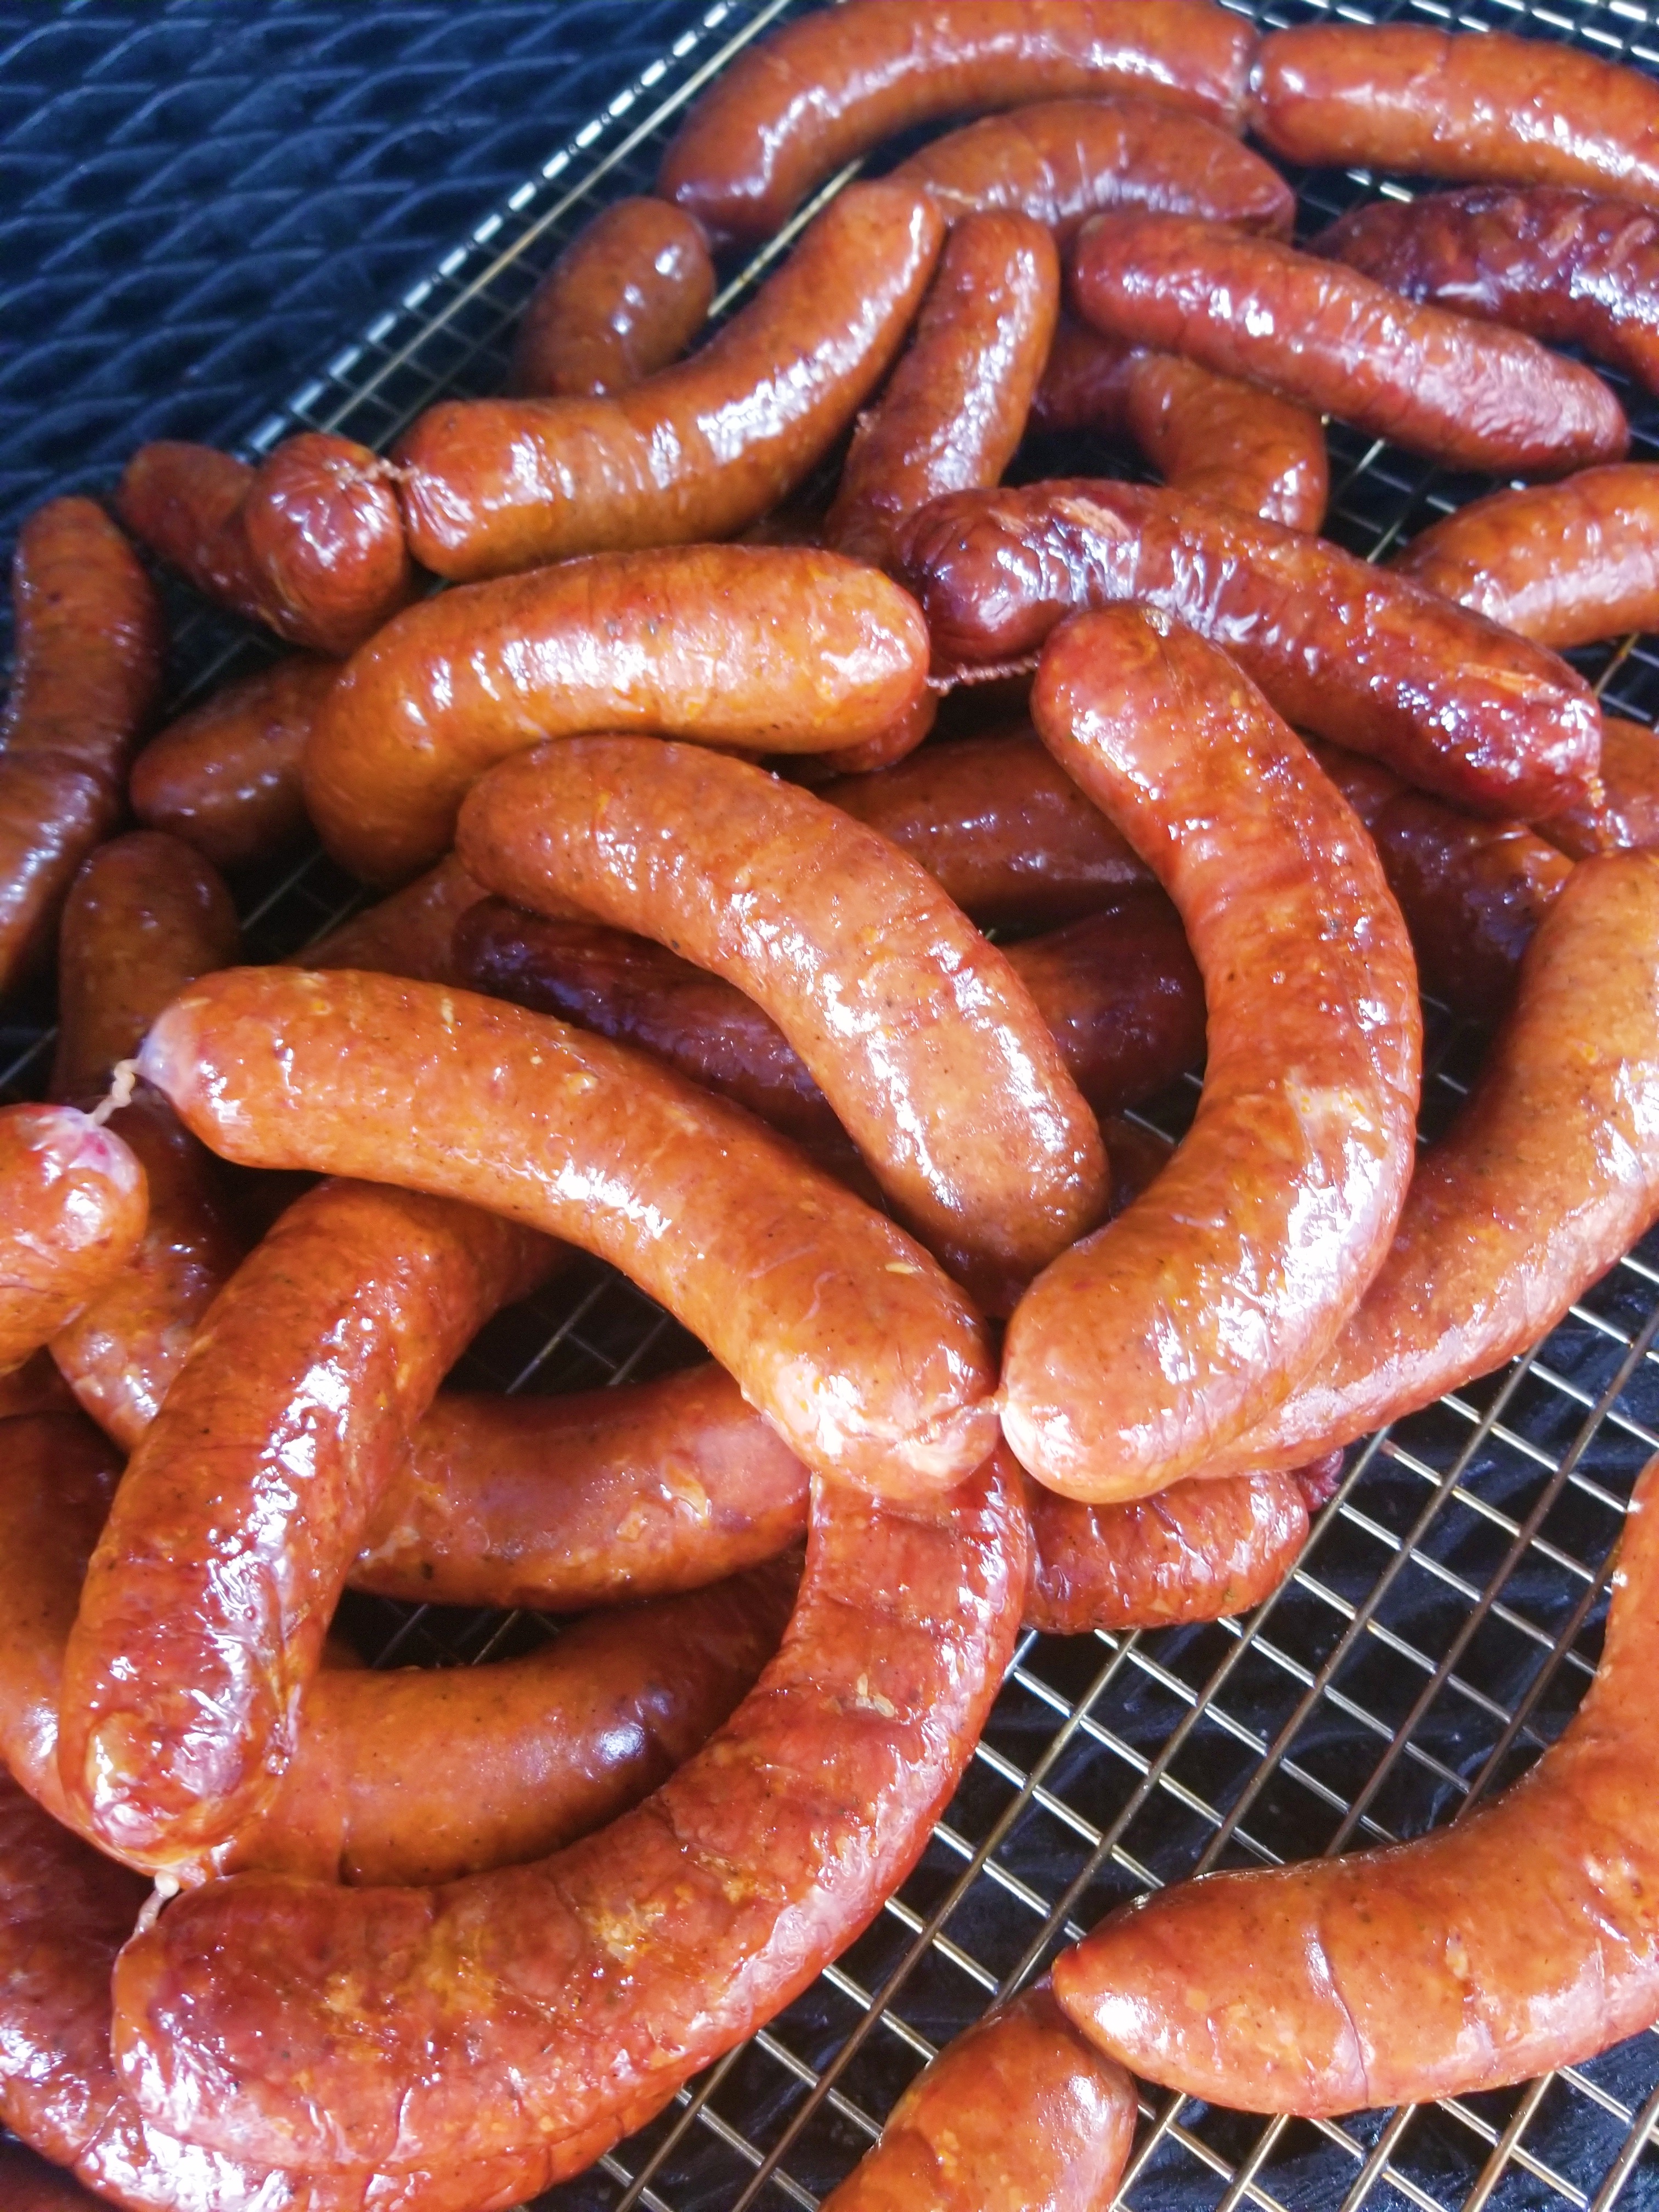 Smoked and grilled Texas hot links at the Roadhouse.